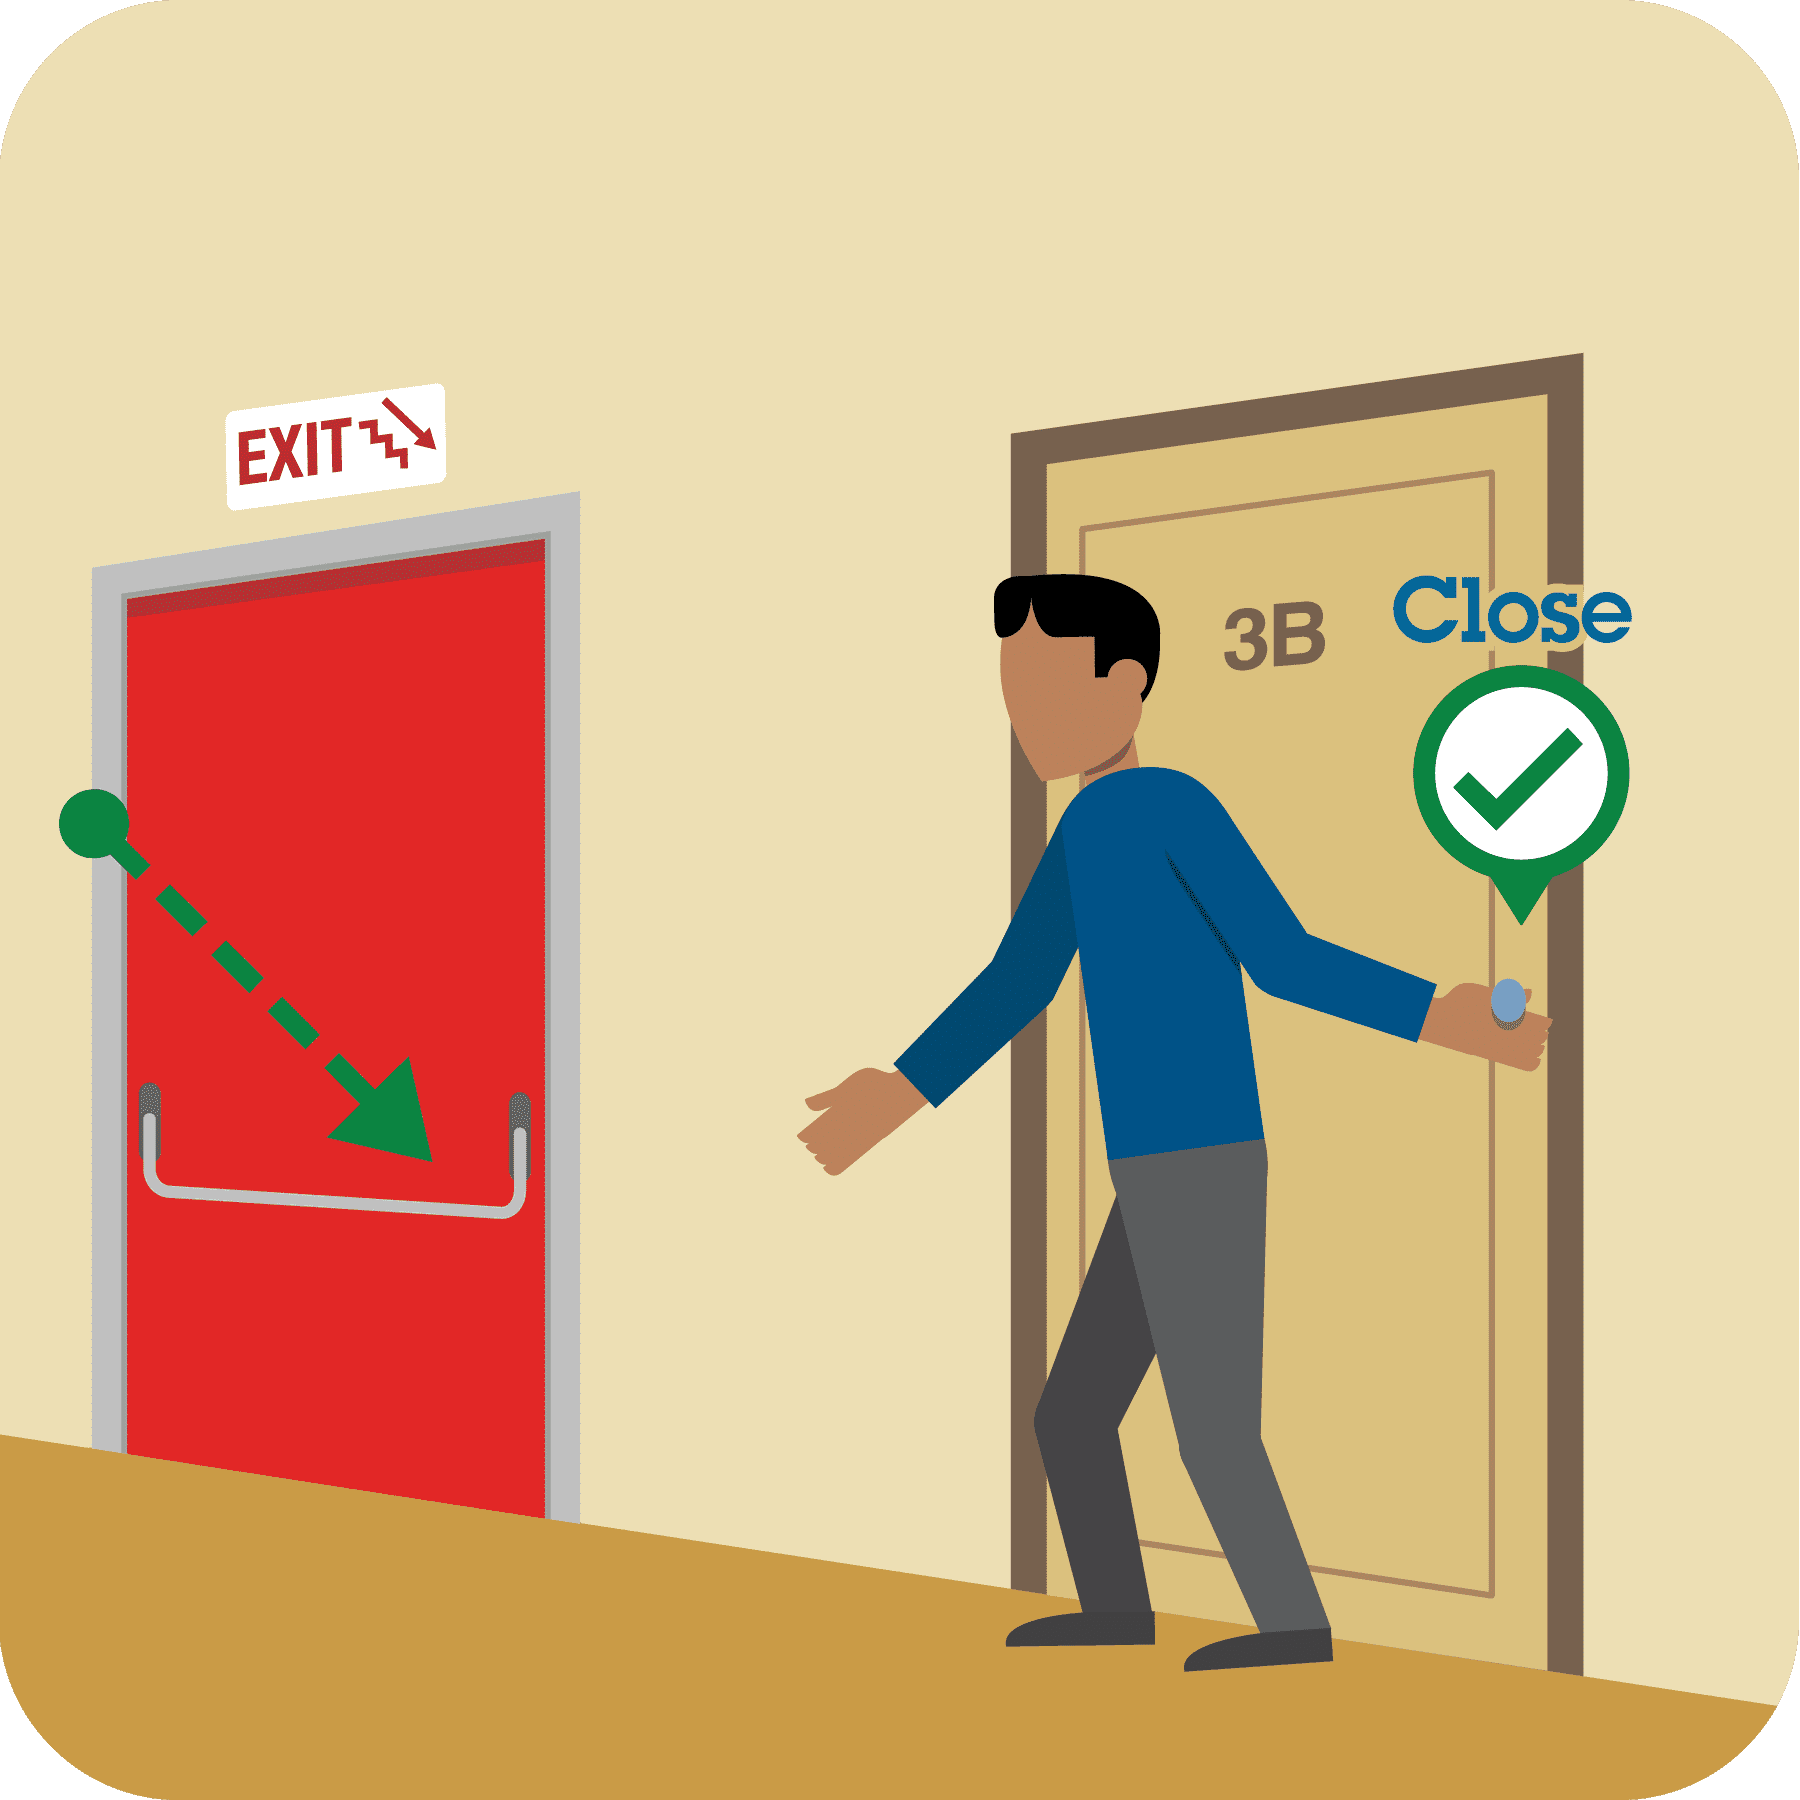 Man closing the door to the apartment. Green arrow showing the way to exit.